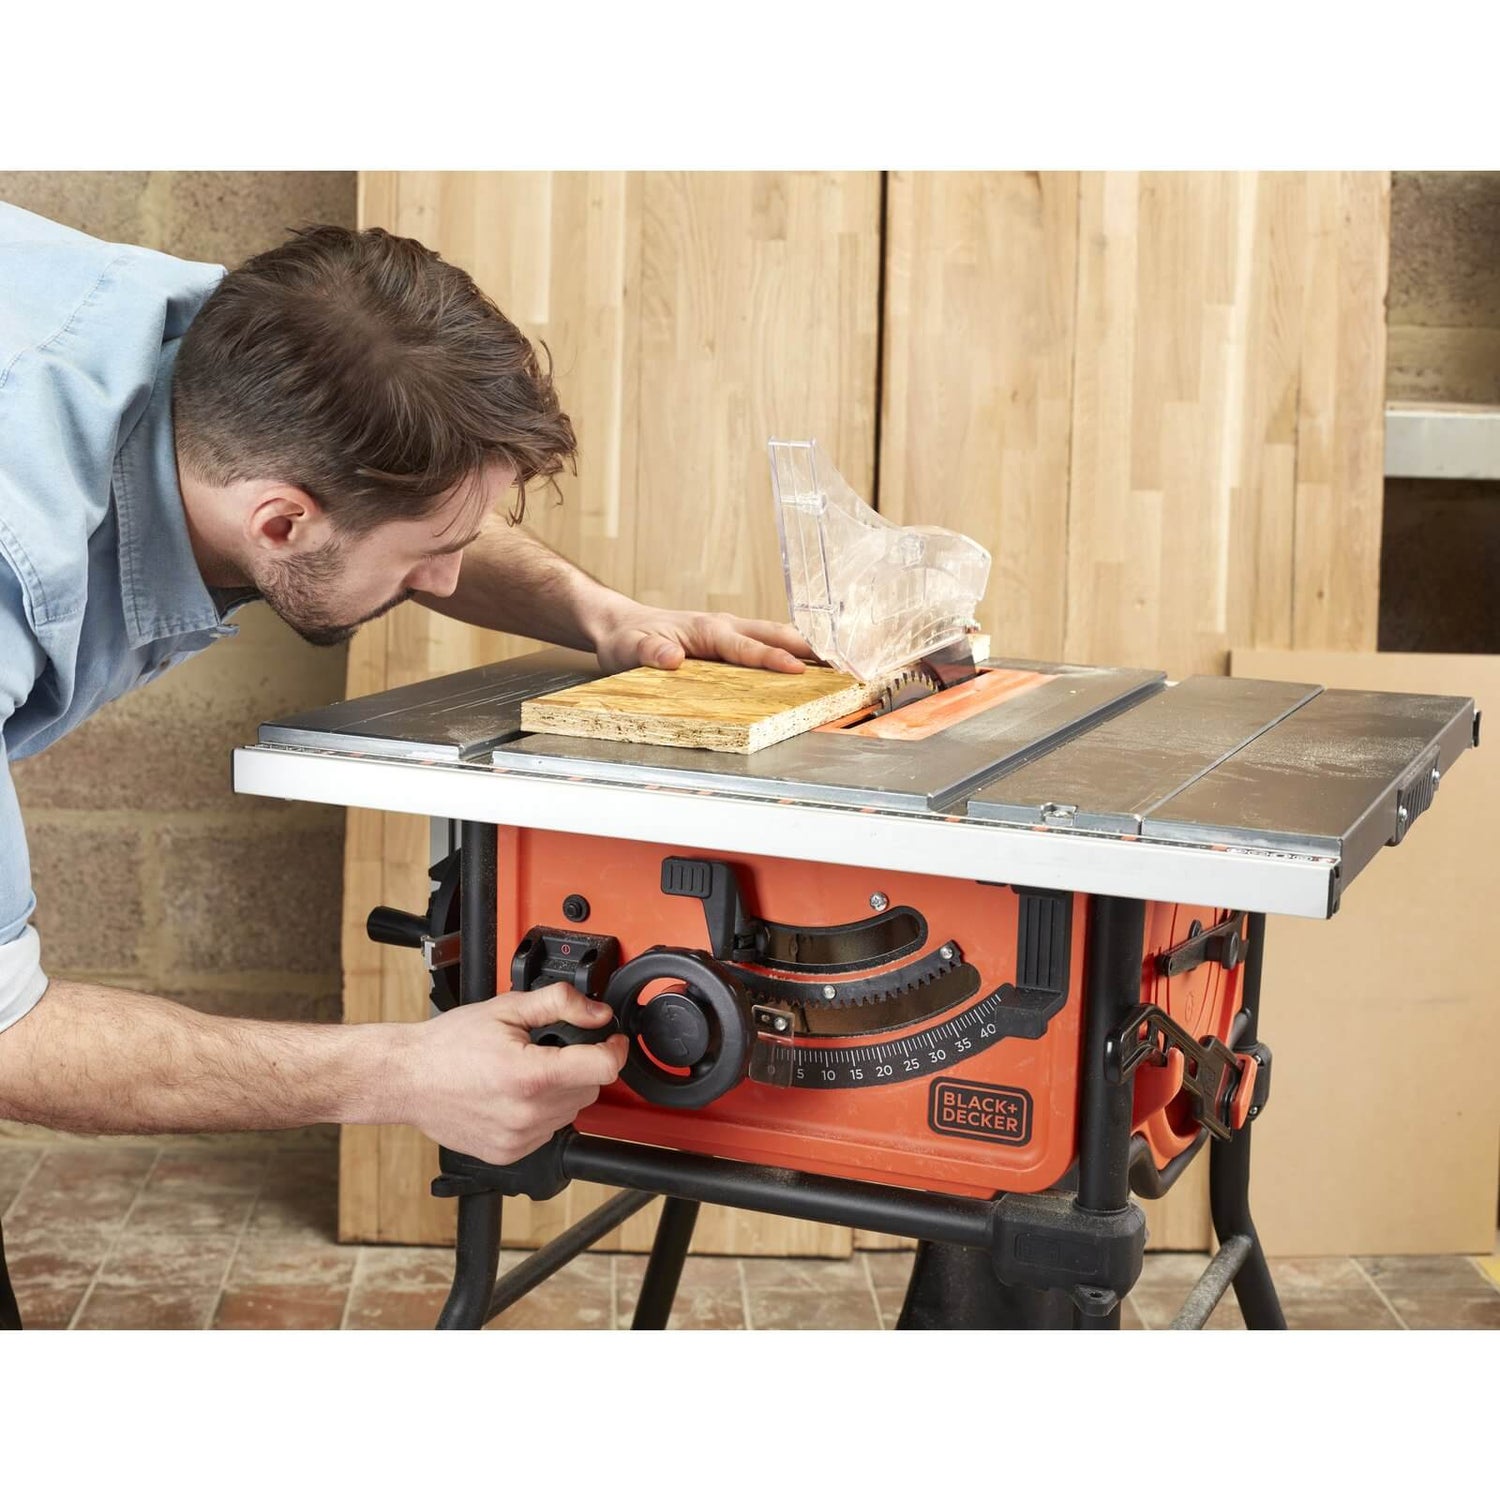 Blackdecker 254mm 1800w Corded Table Saw Bes720 Gb Homebase